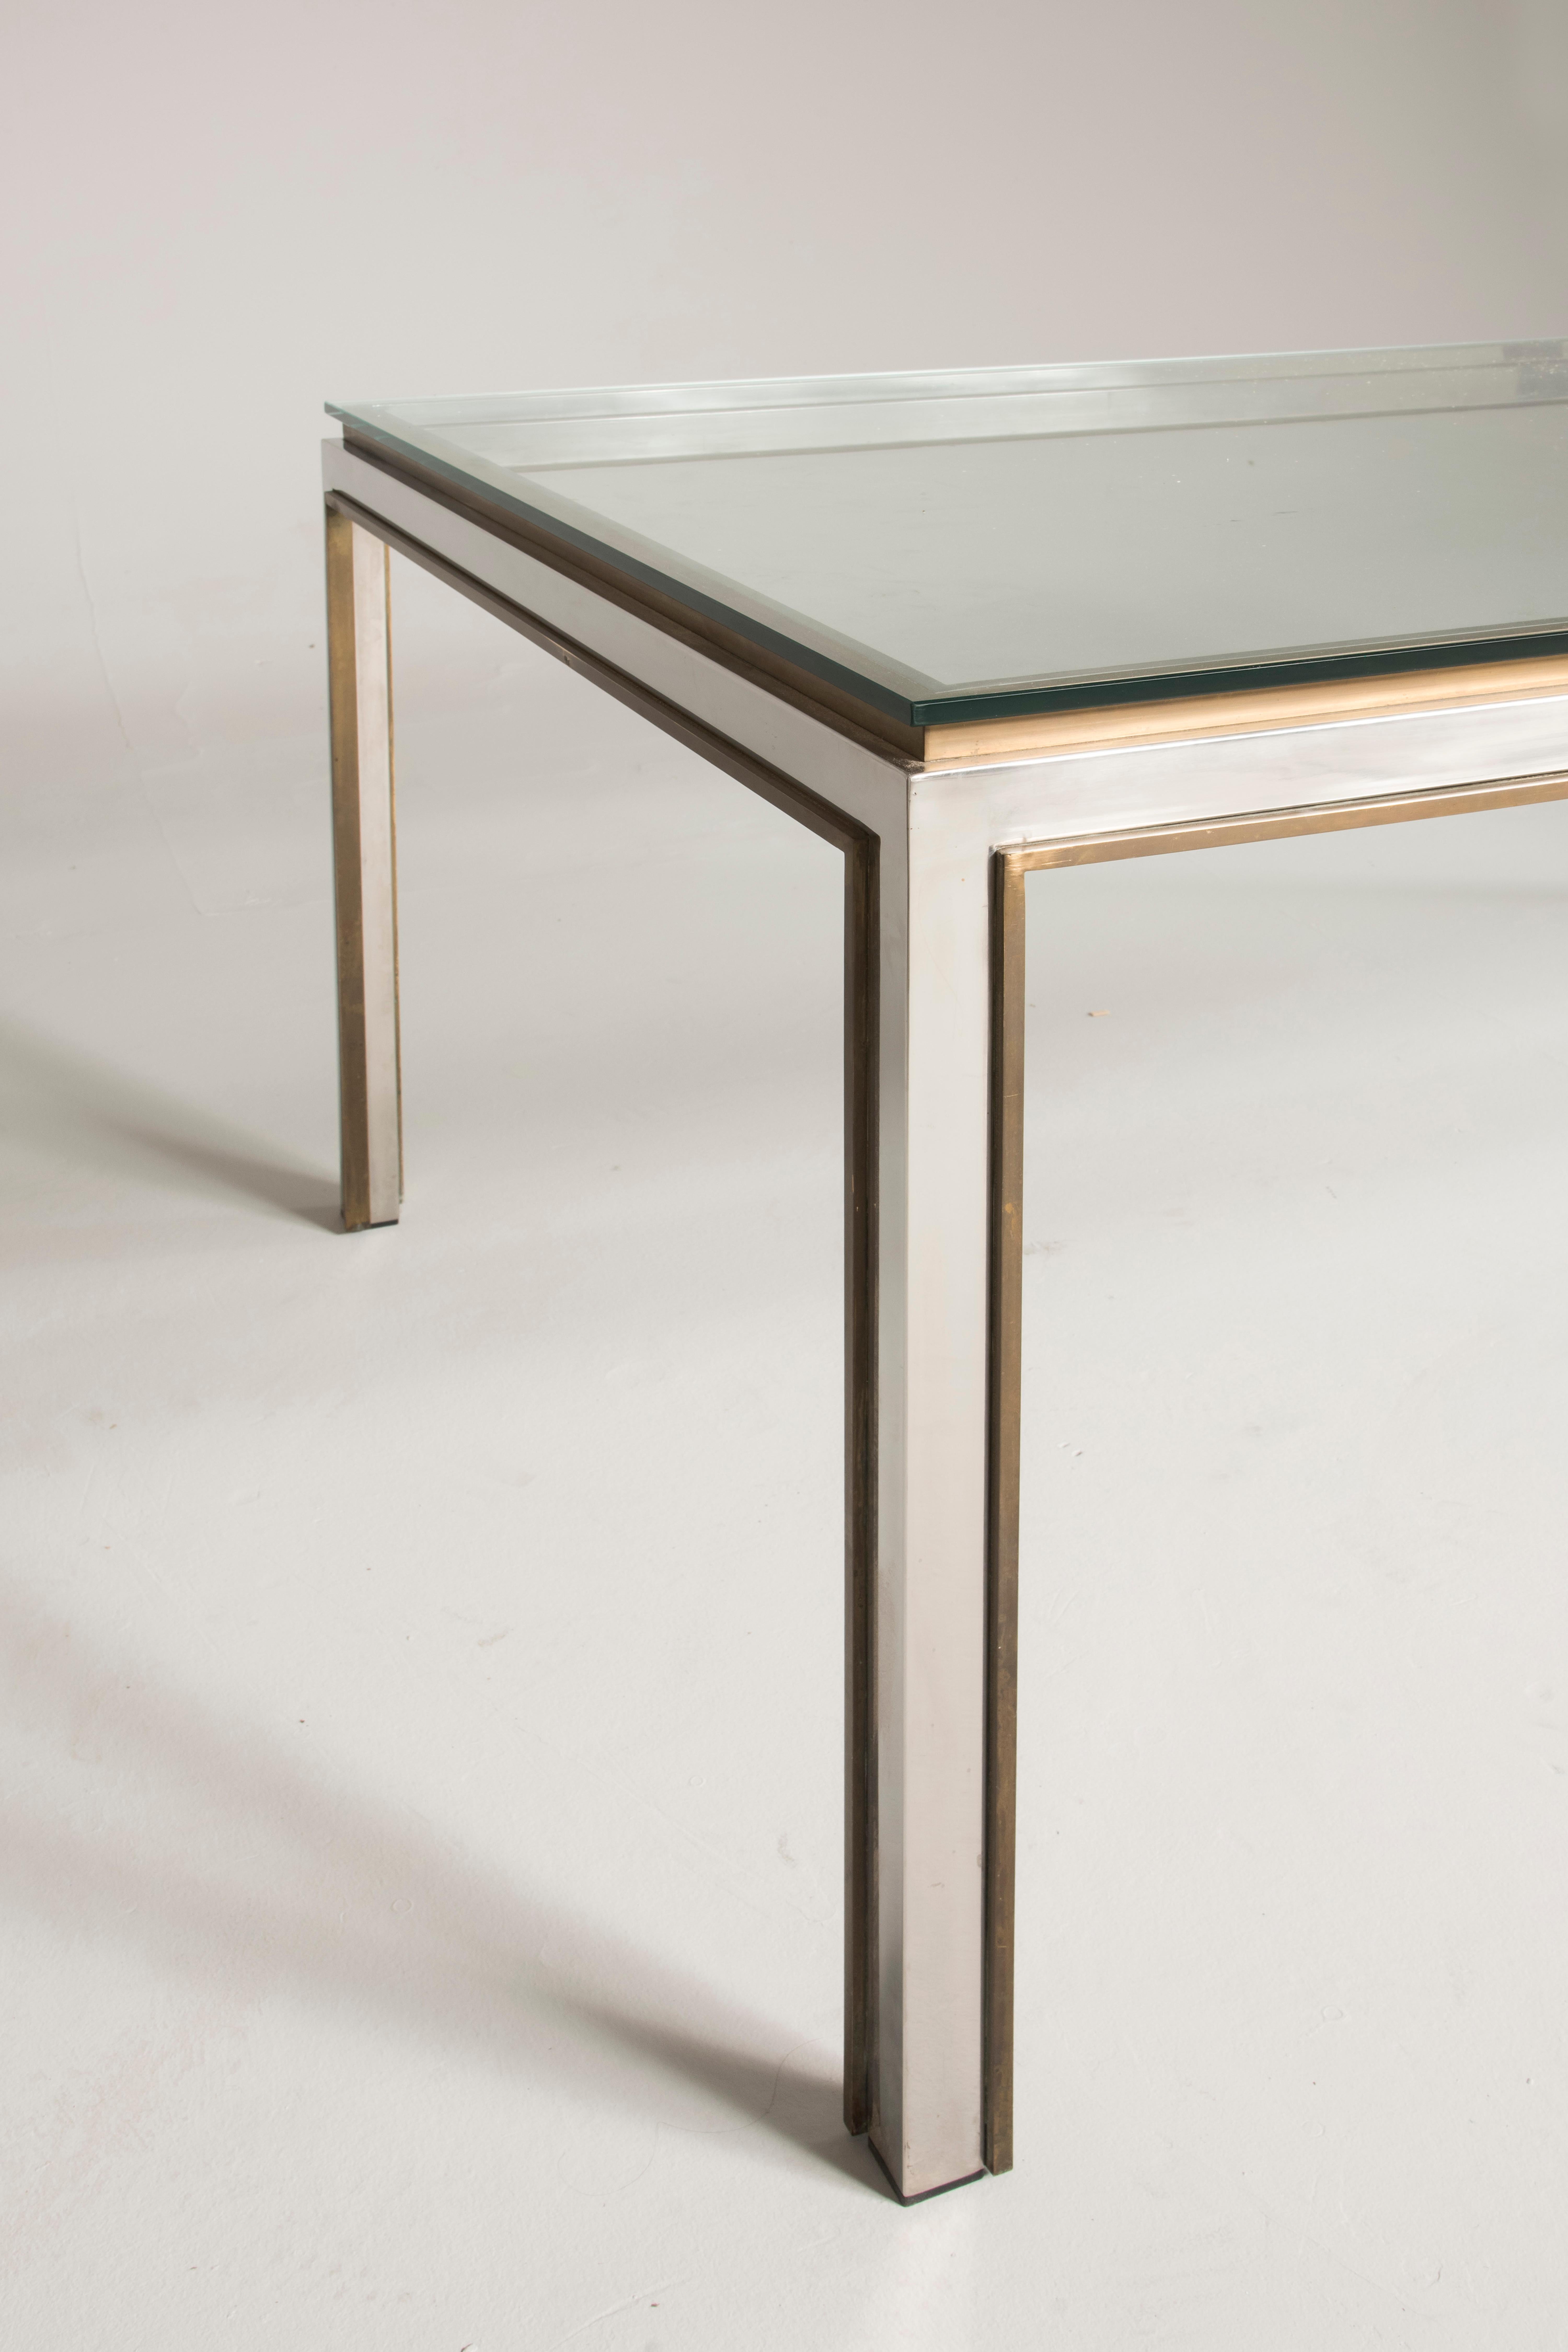 Fiorentina Model table by Willy Rizzo, Italy, 1970s. Steel and brass structure, glass top. Size: 101 x 204 cm, H 75 cm. A video is available upon request. Good conditions, wears coherent with age and prior use. No restoration needed. 

 Willy